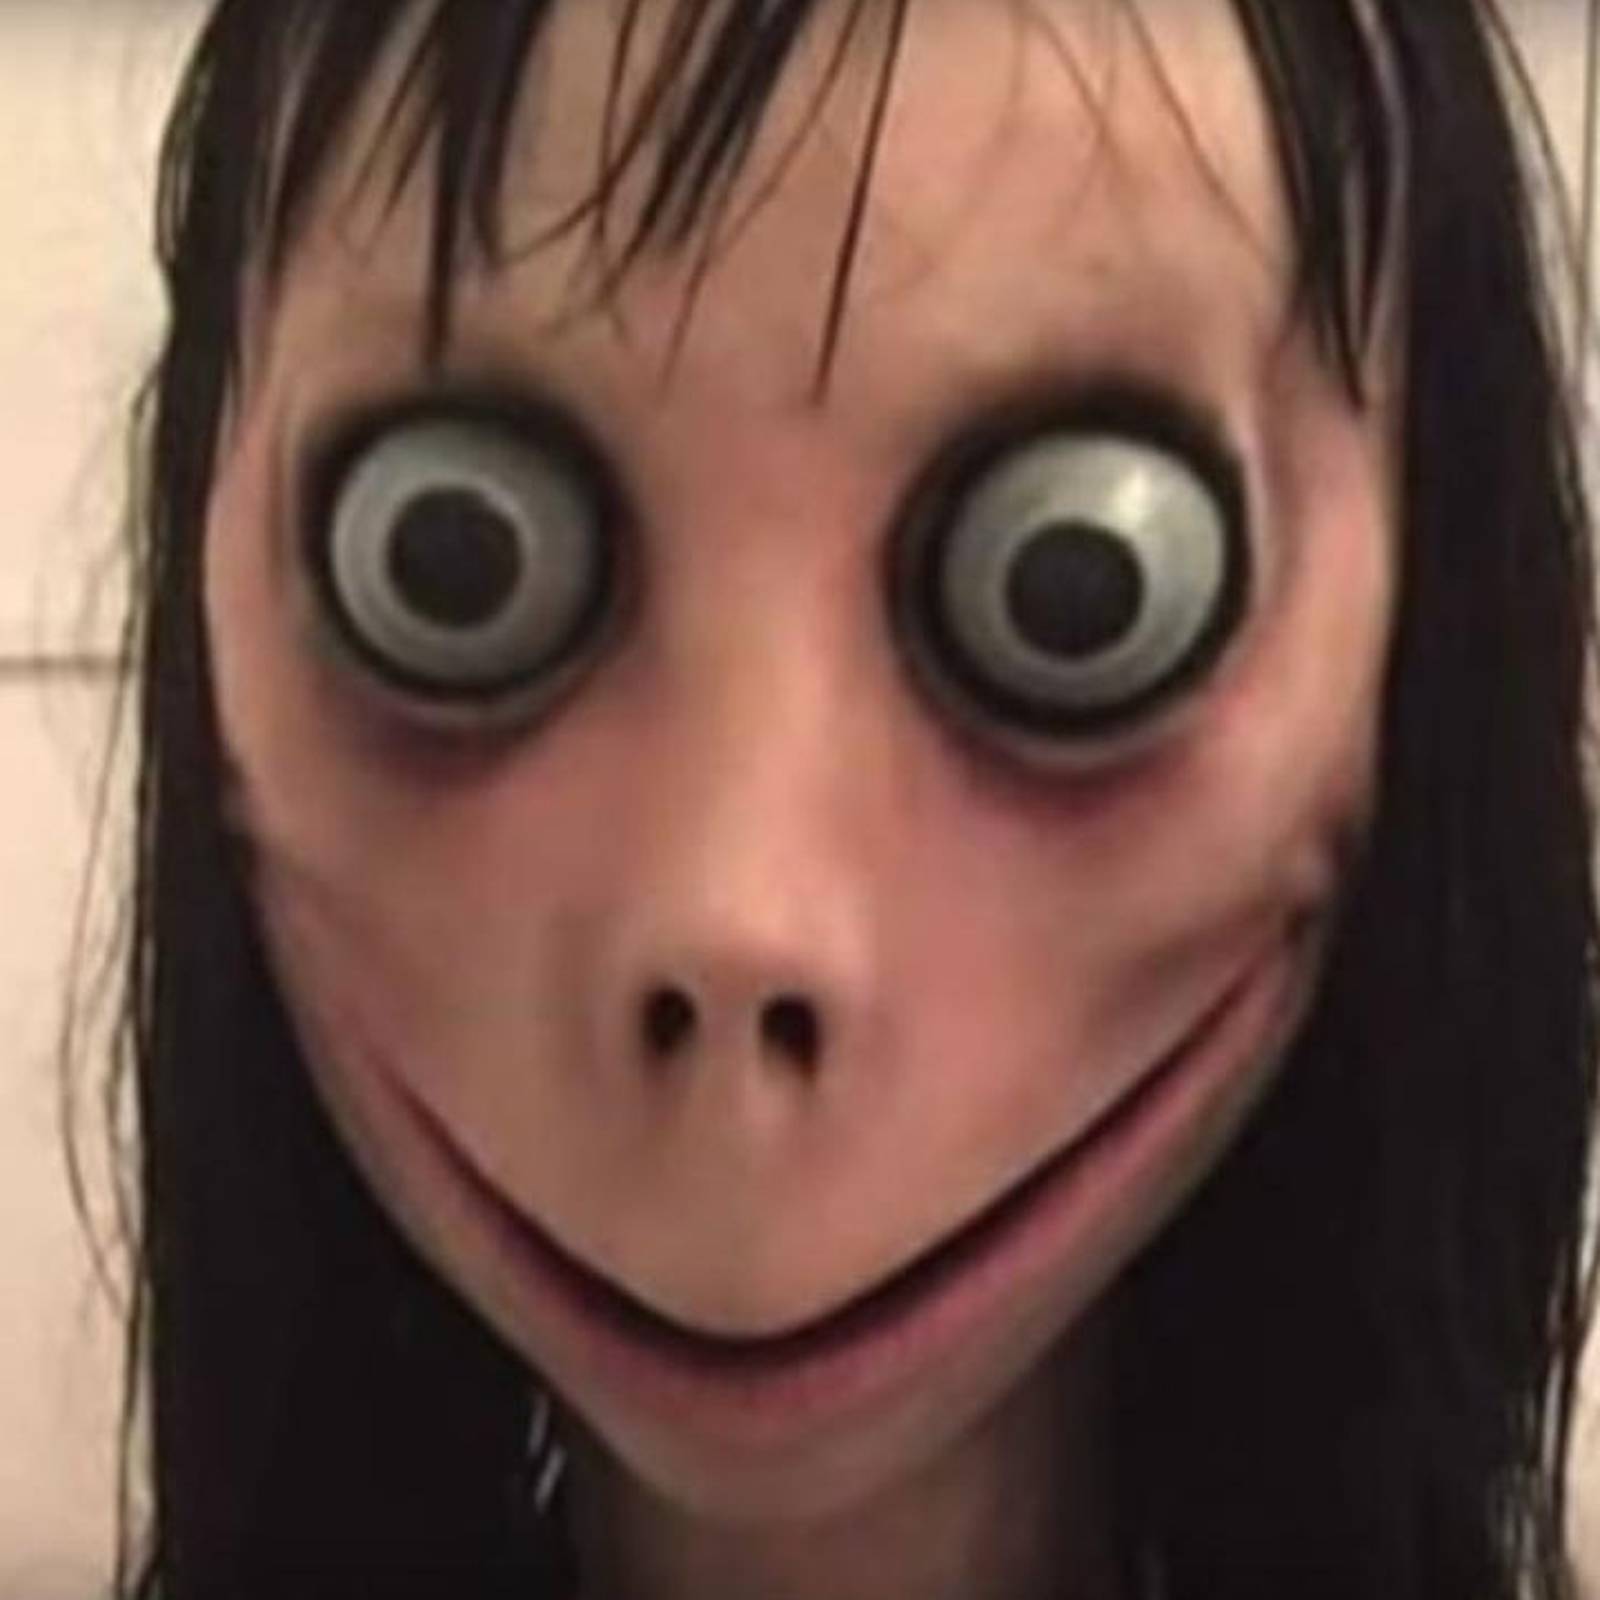 Scary 'Momo Challenge' takes over the internet again and threatens kids